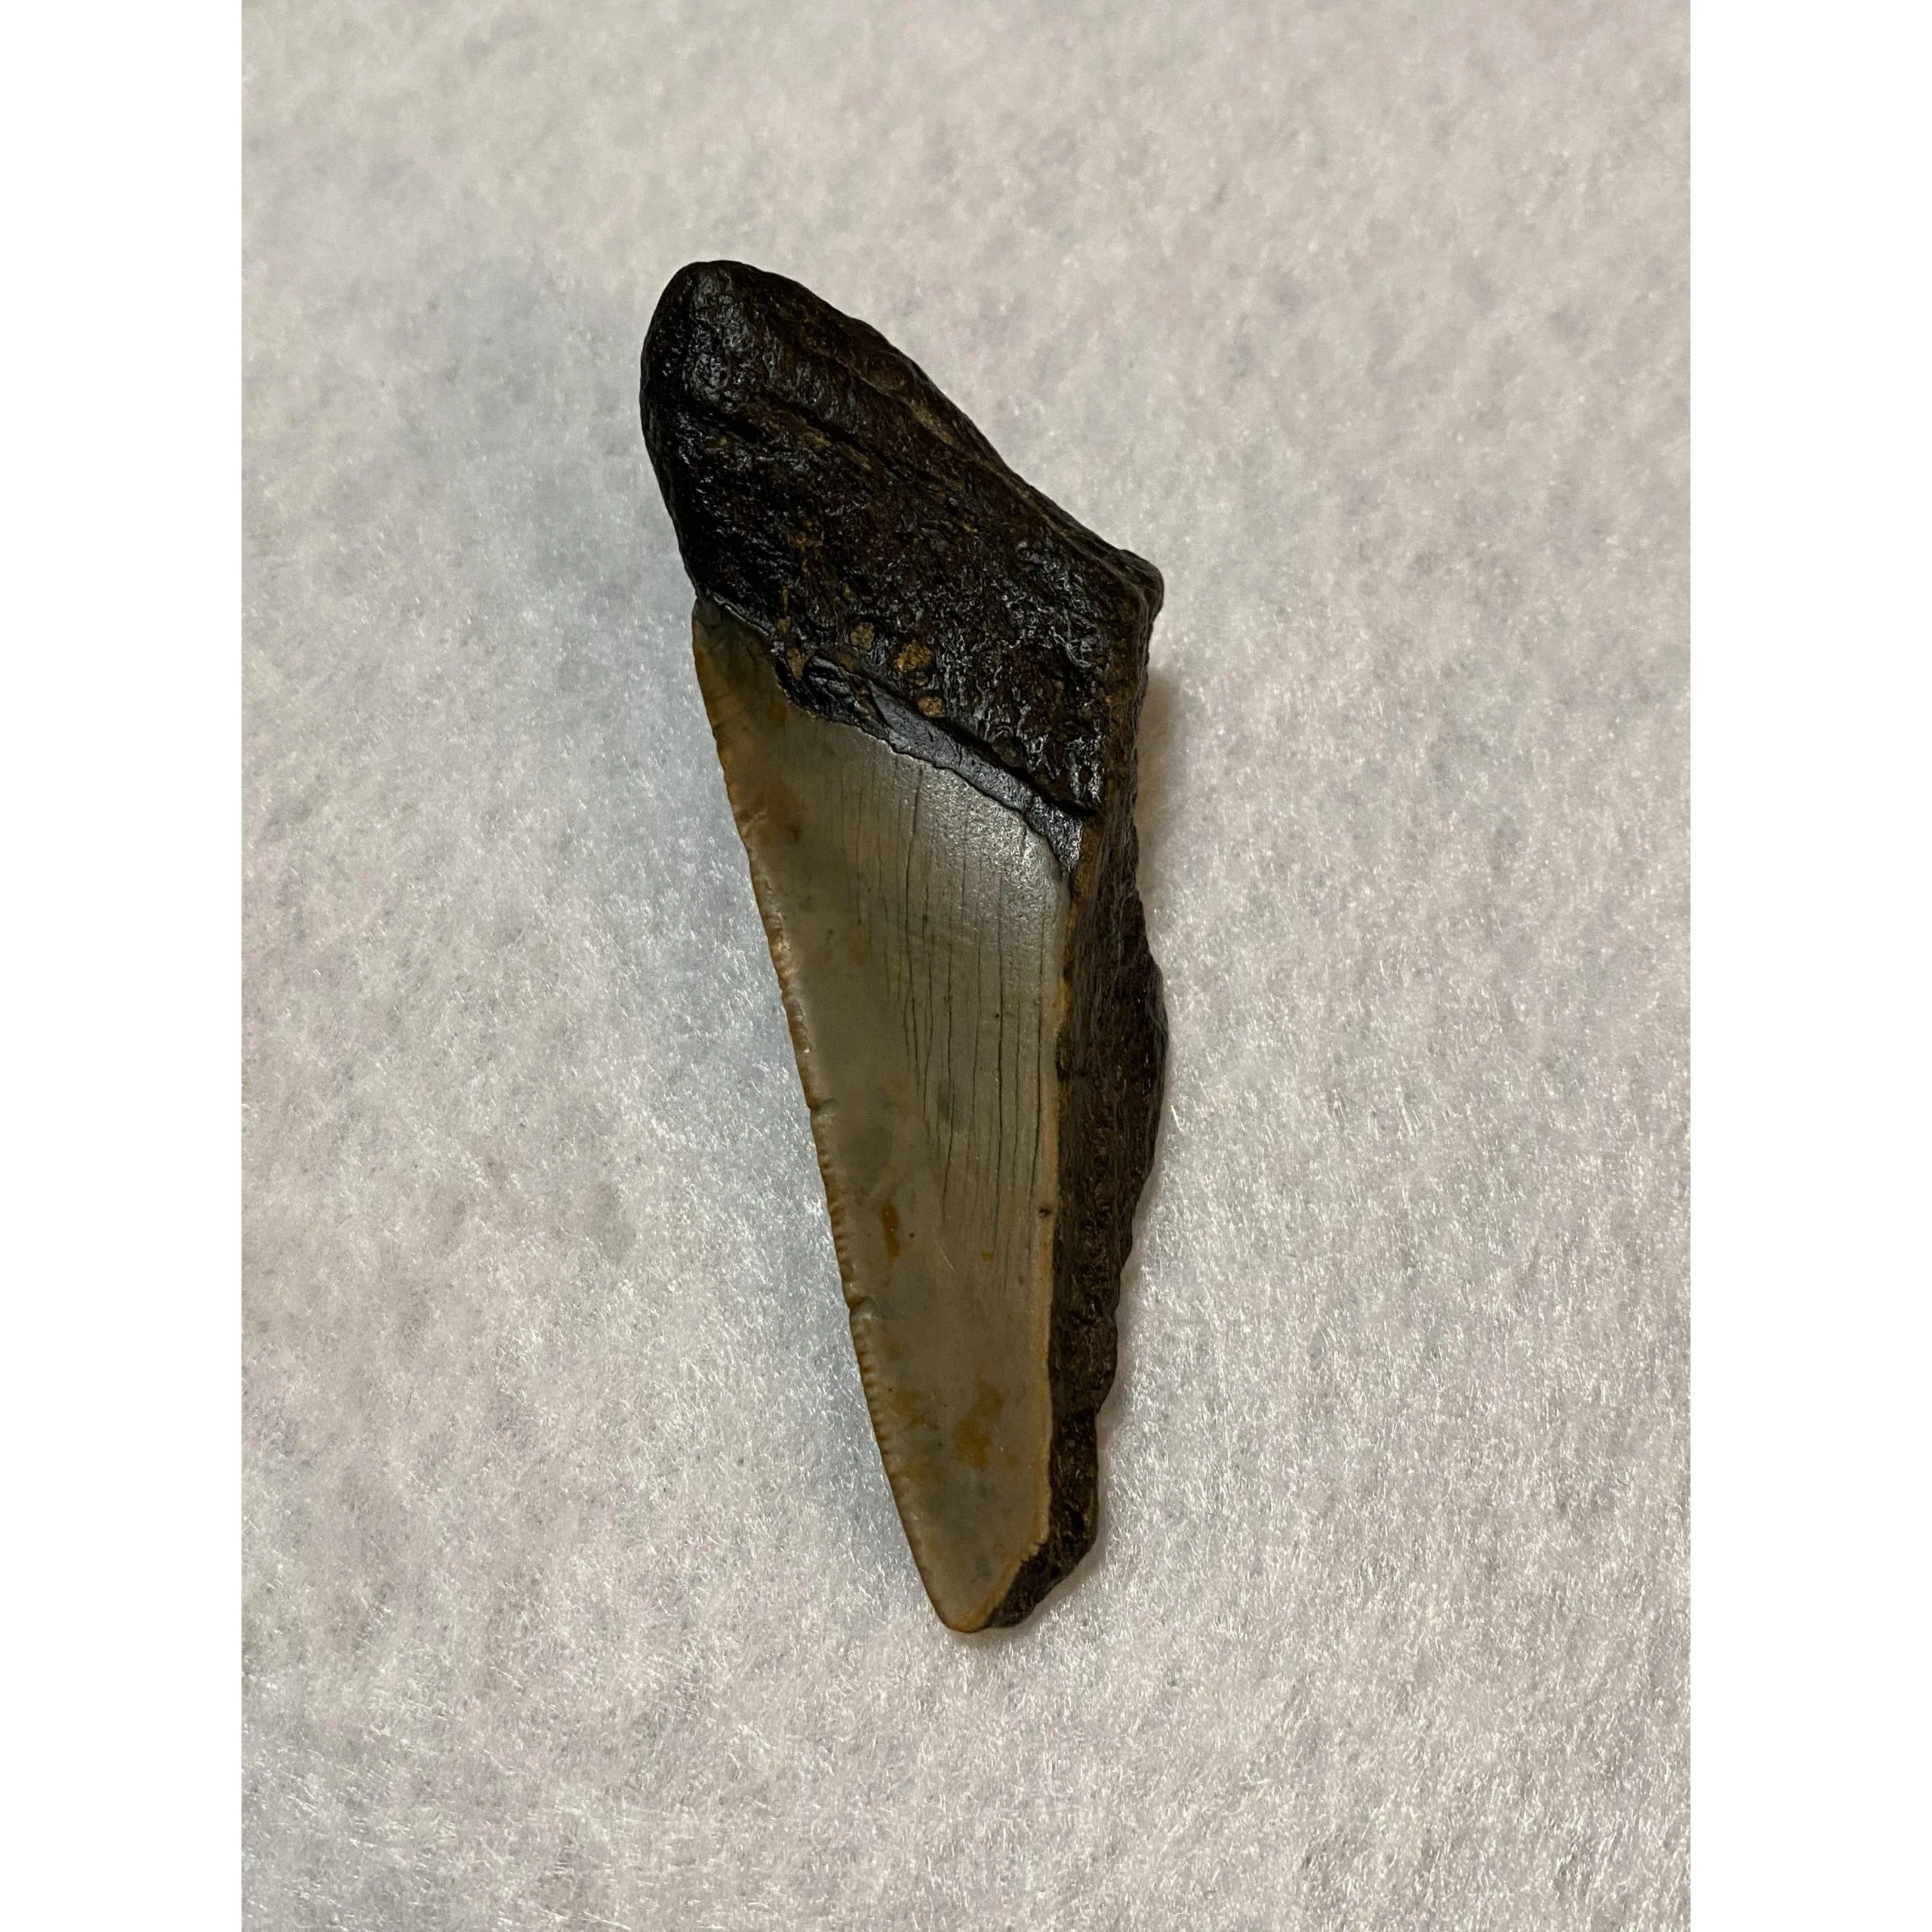 Megalodon Partial Tooth, South Carolina, 3.80 inch Prehistoric Online